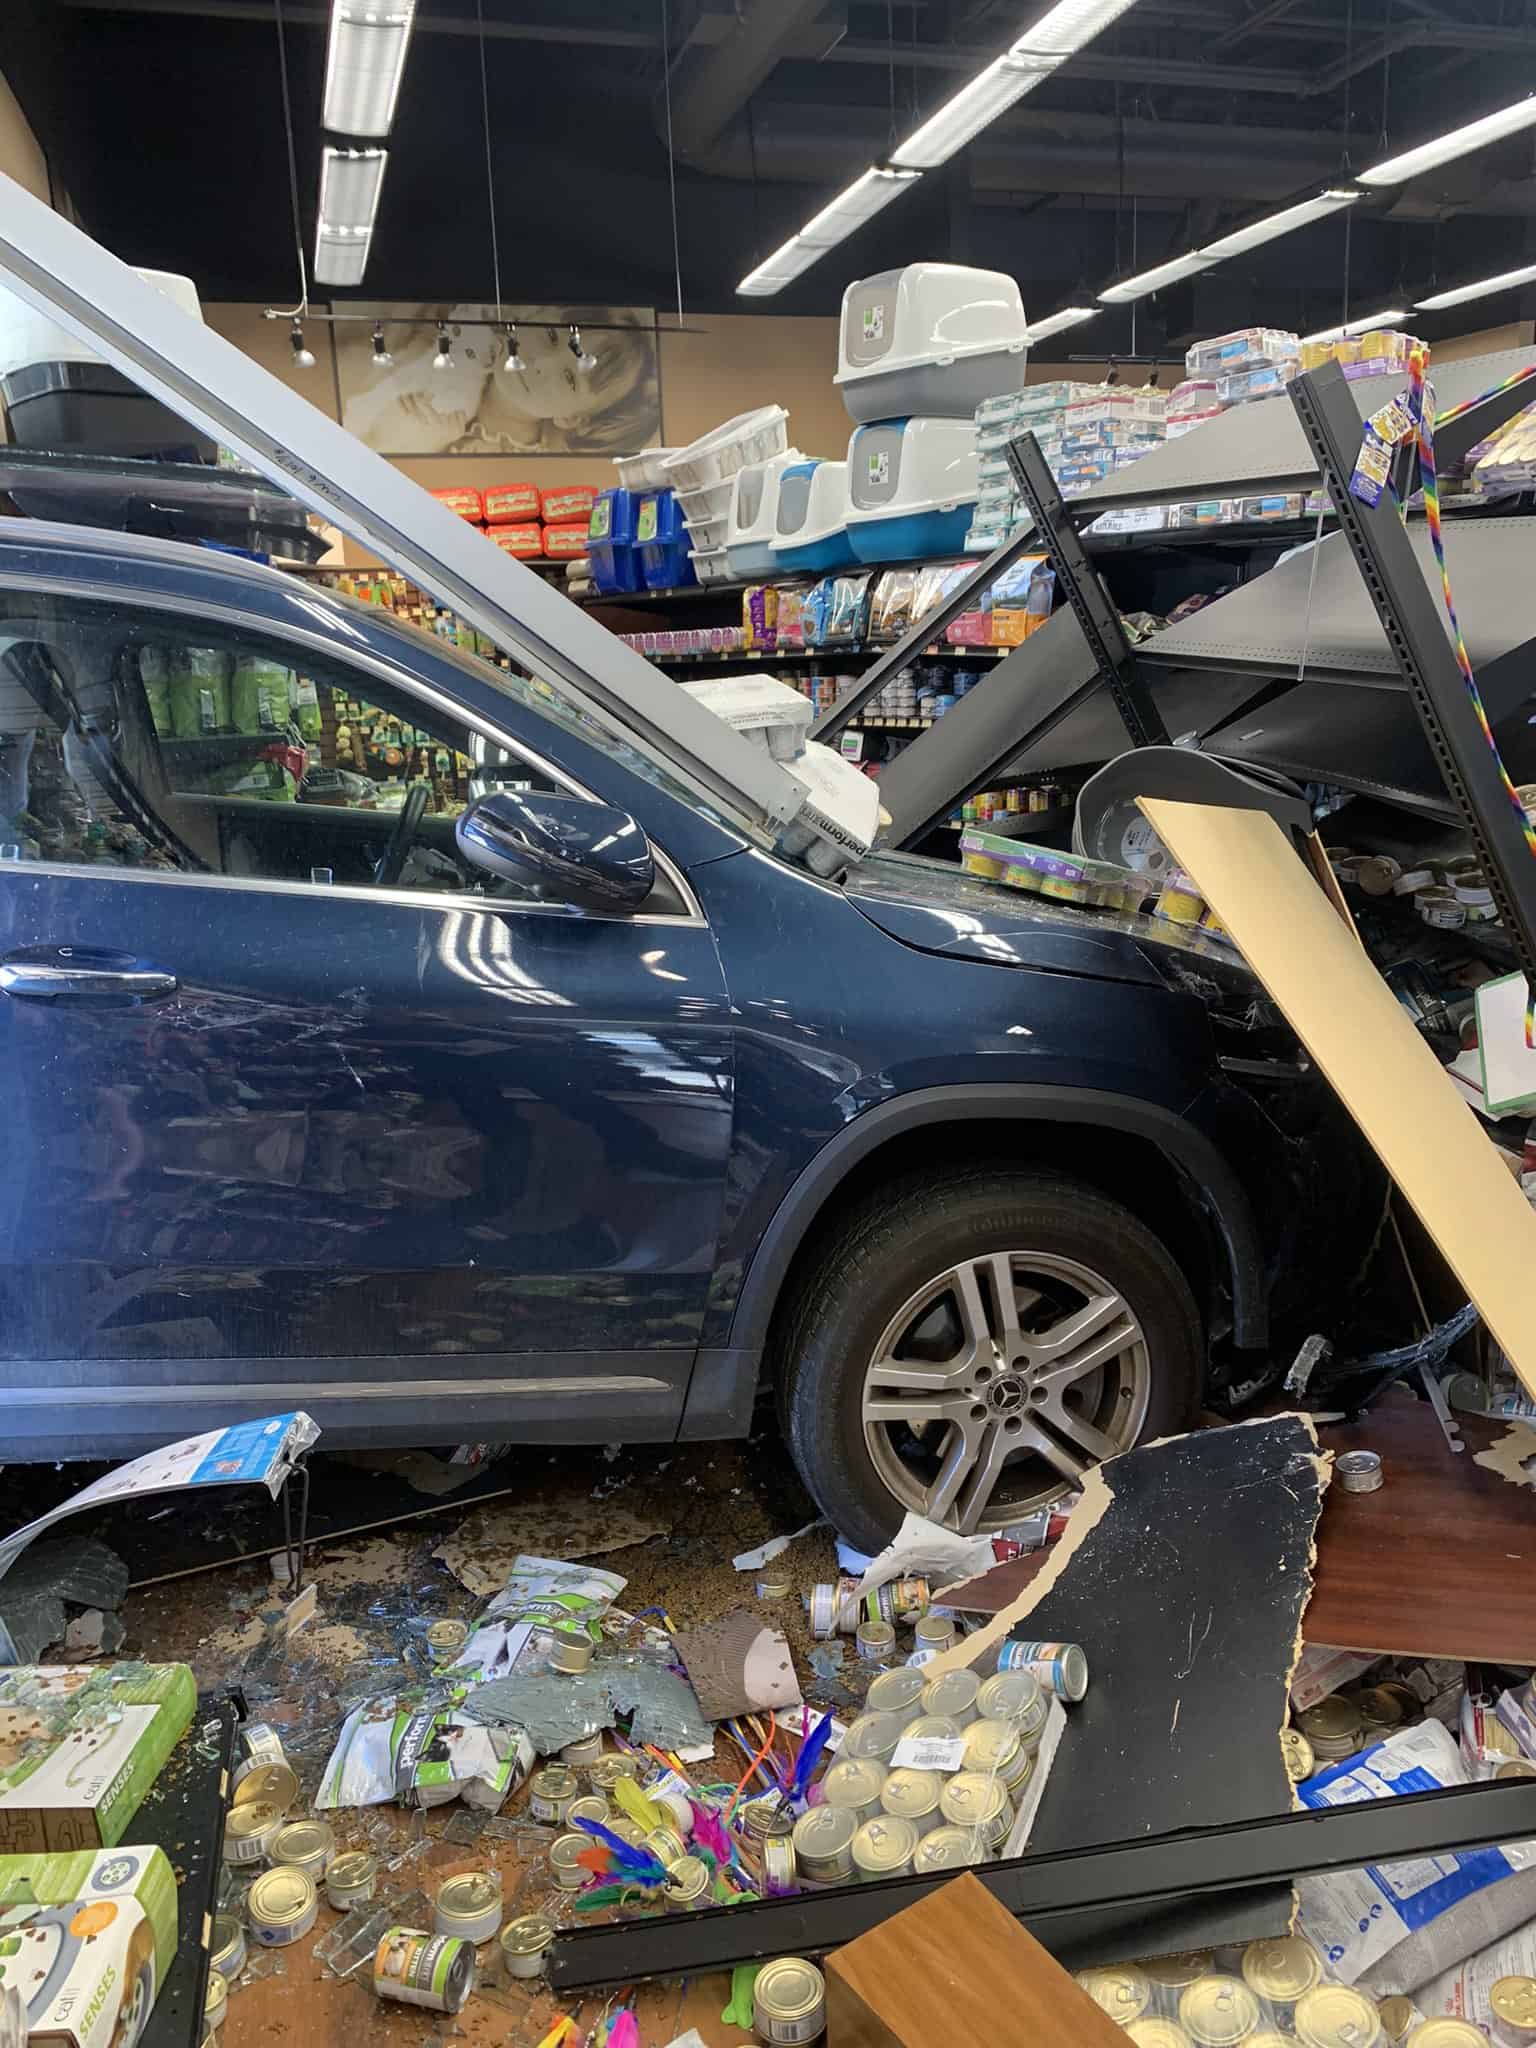 The front end of a vehicle sits in the aftermath of a destroyed pet store after crashing into it.